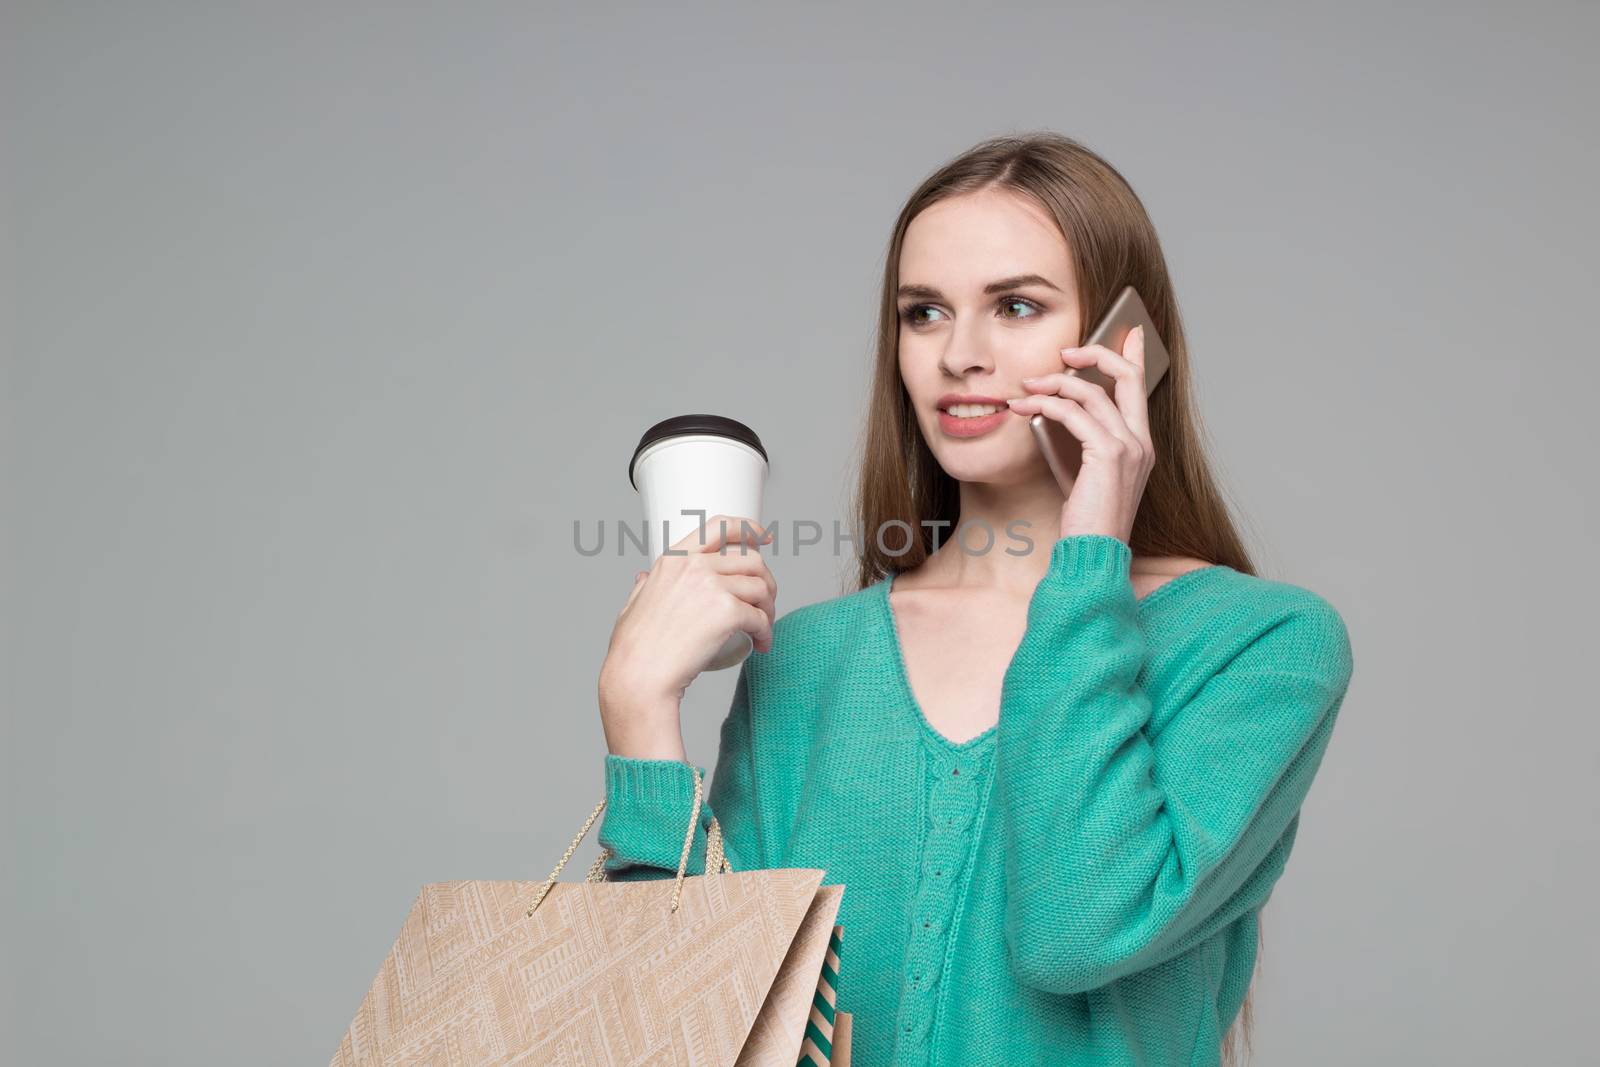 Girl in green with bags drinking coffee talks by smartphone by VeraVerano